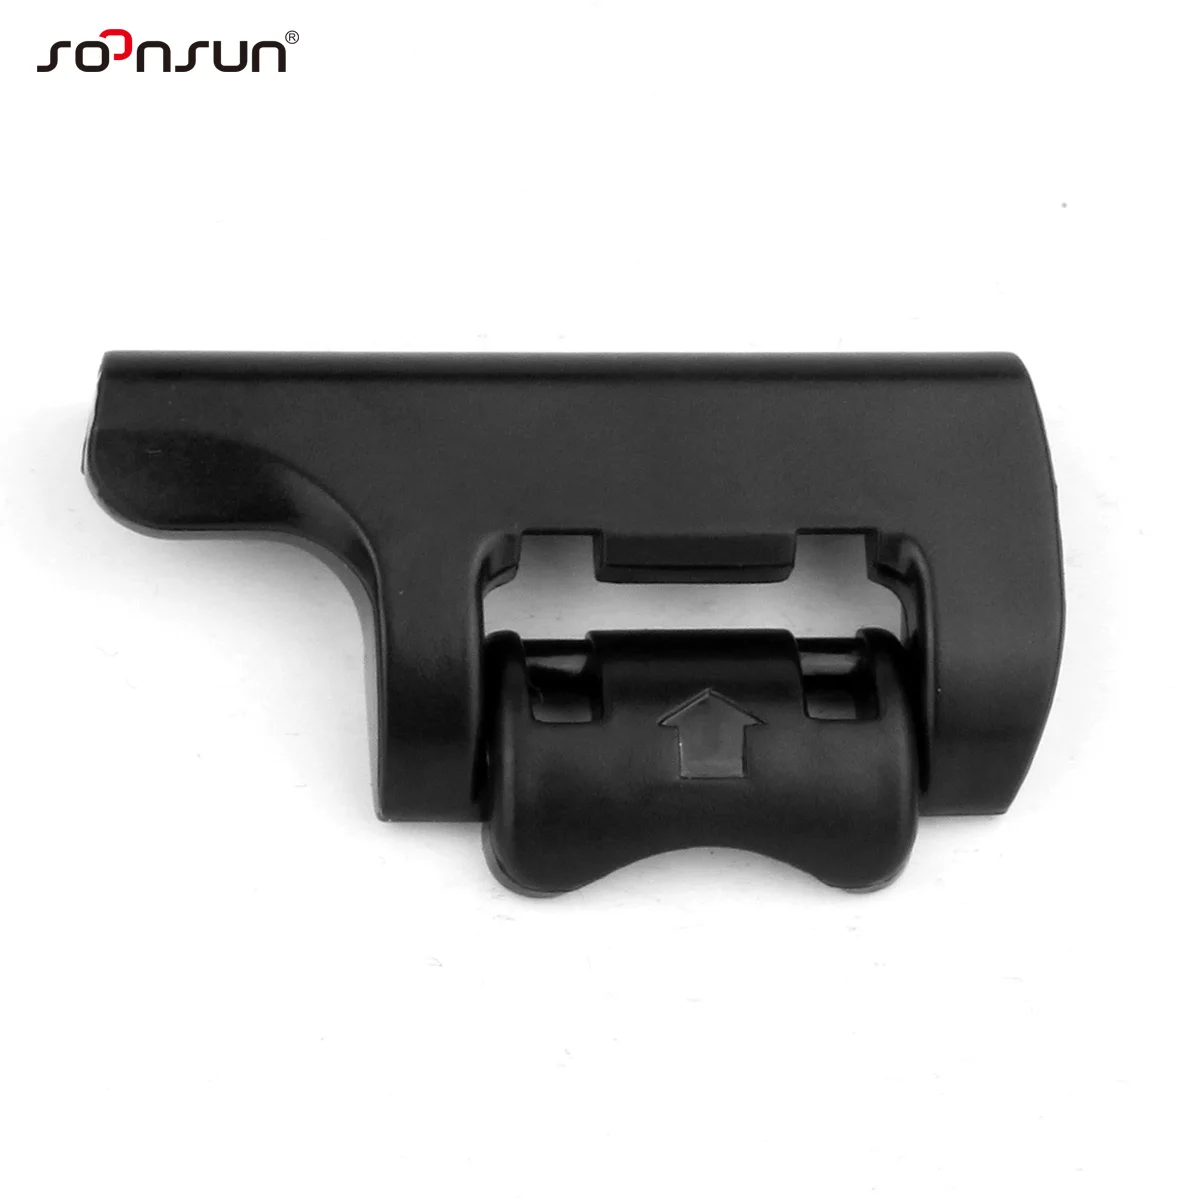 SOONSUN Lock Buckle Snap Latch Buckle Catch for GoPro Hero 2 3 Camera Housing Case Shell For Go Pro Accessories